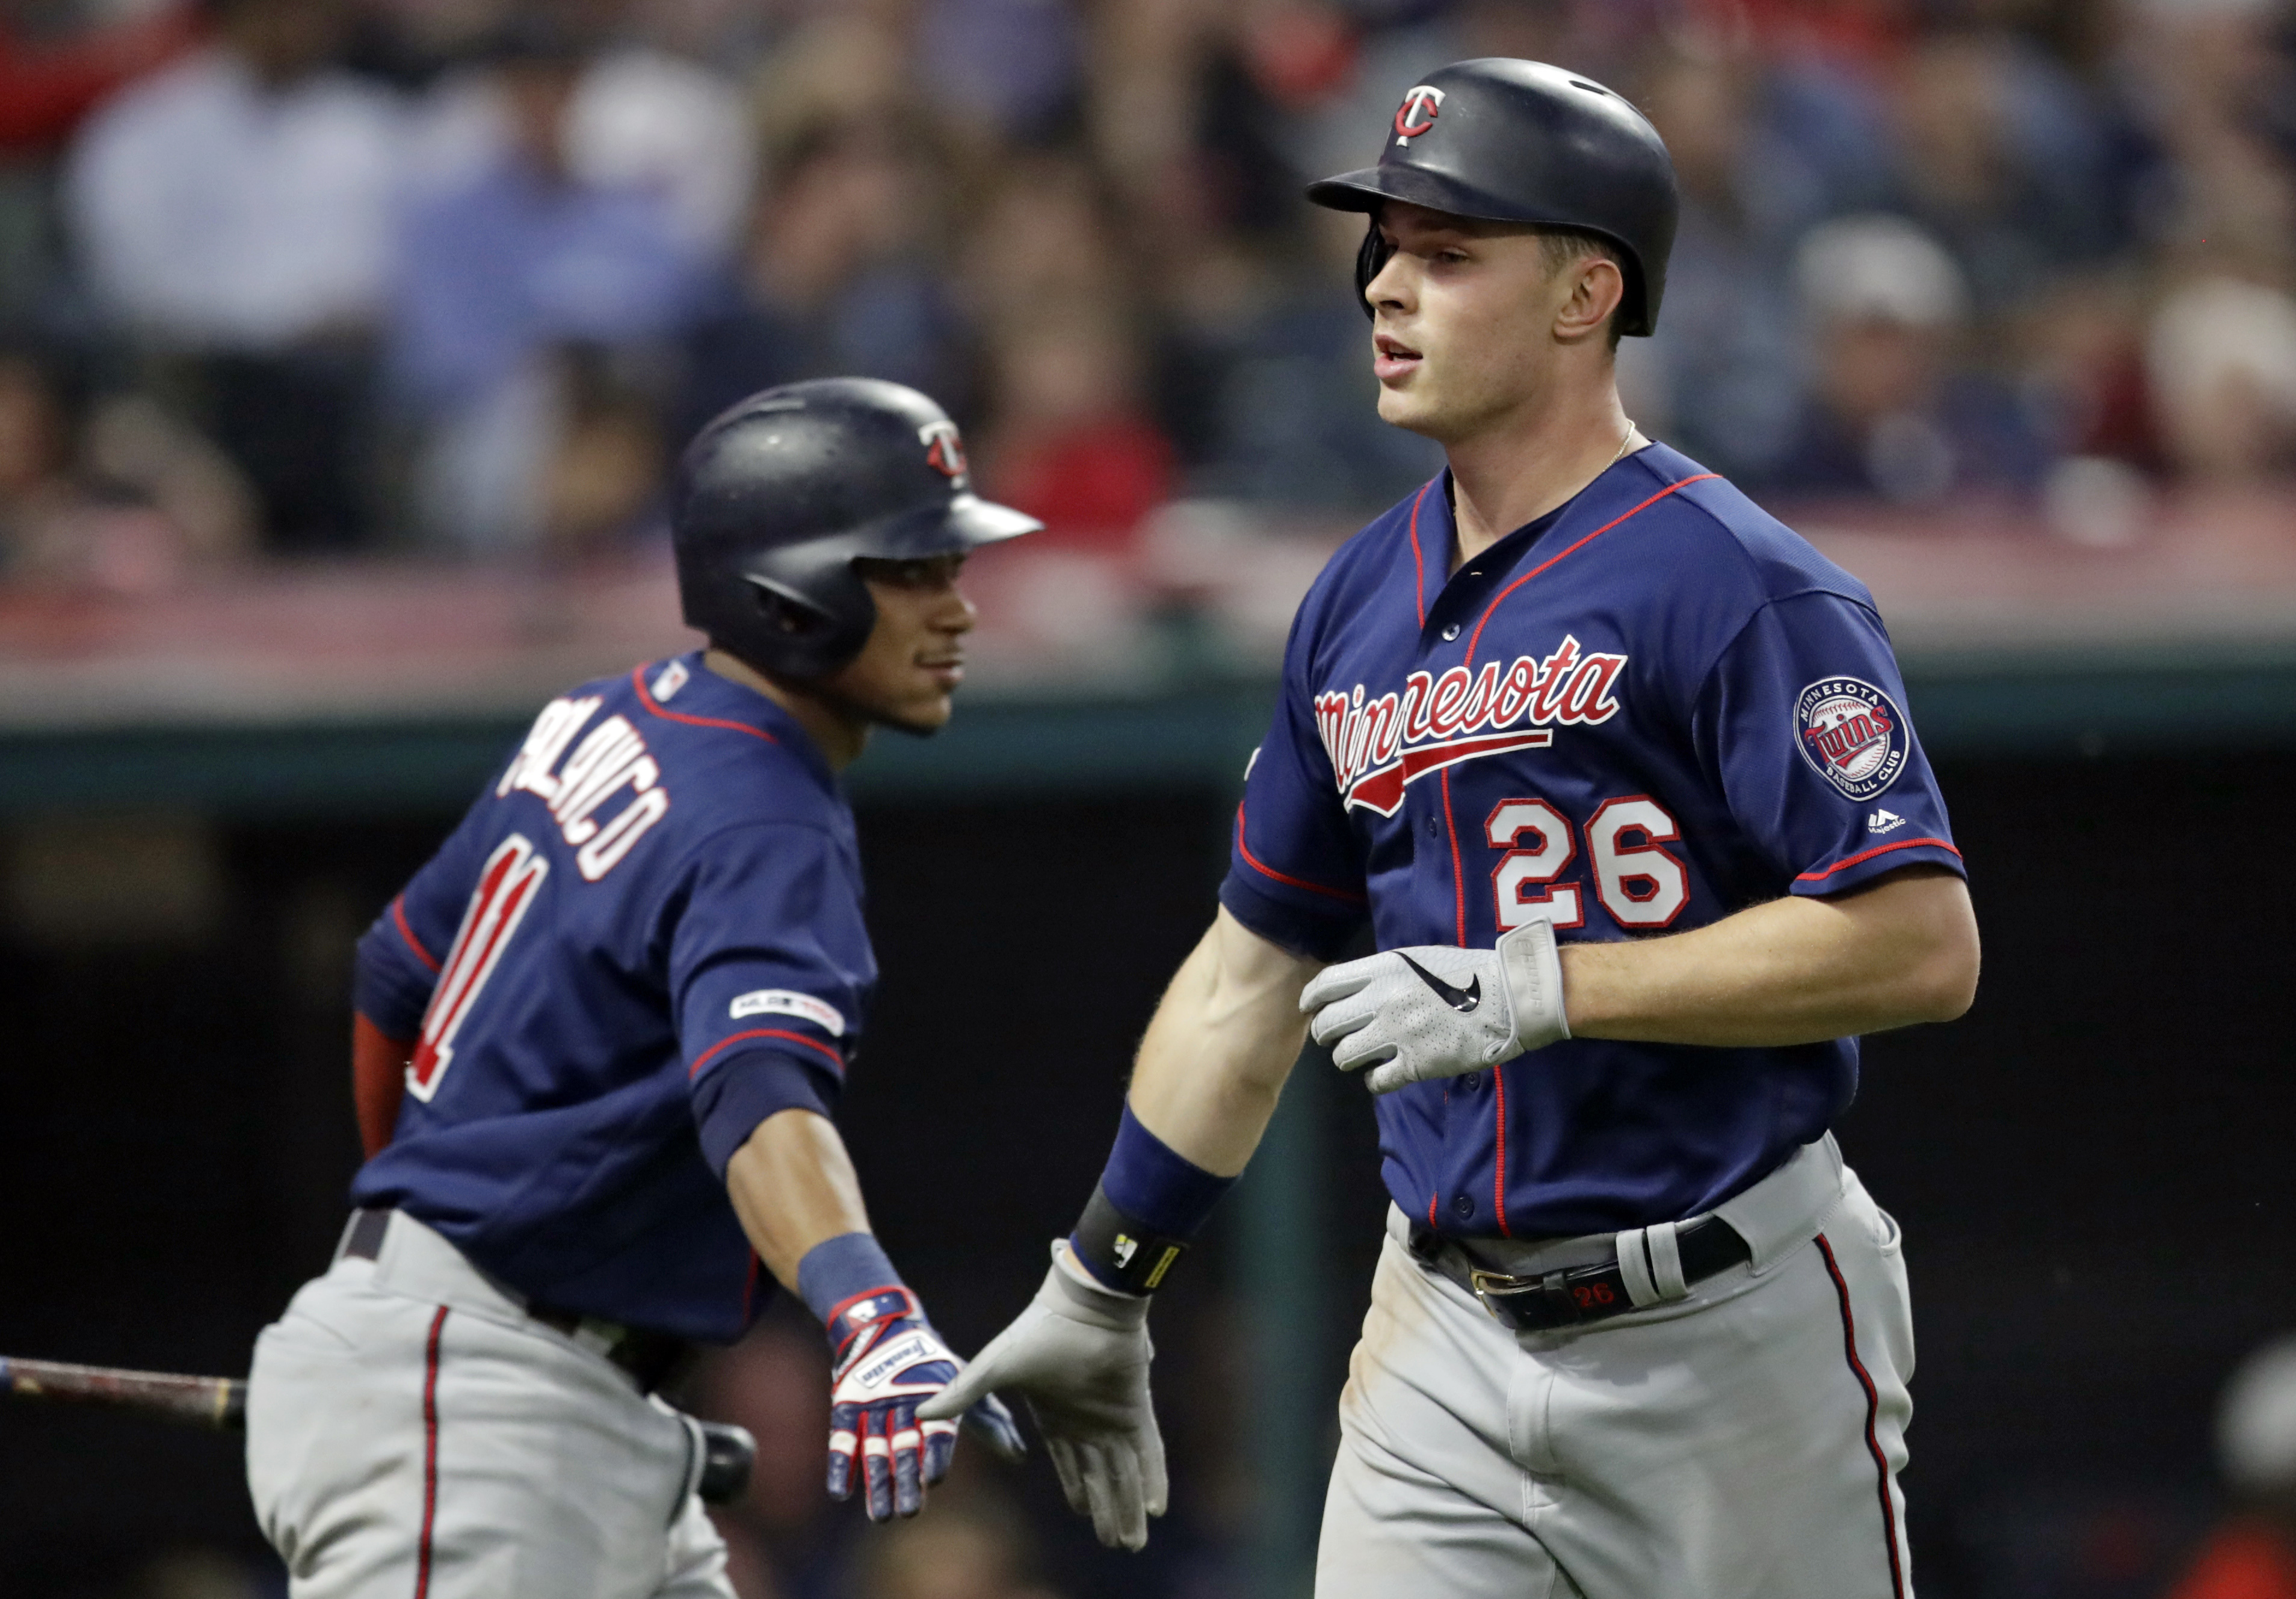 Kepler hits 3 homers, Twins edge Indians 5-4 to avoid sweep